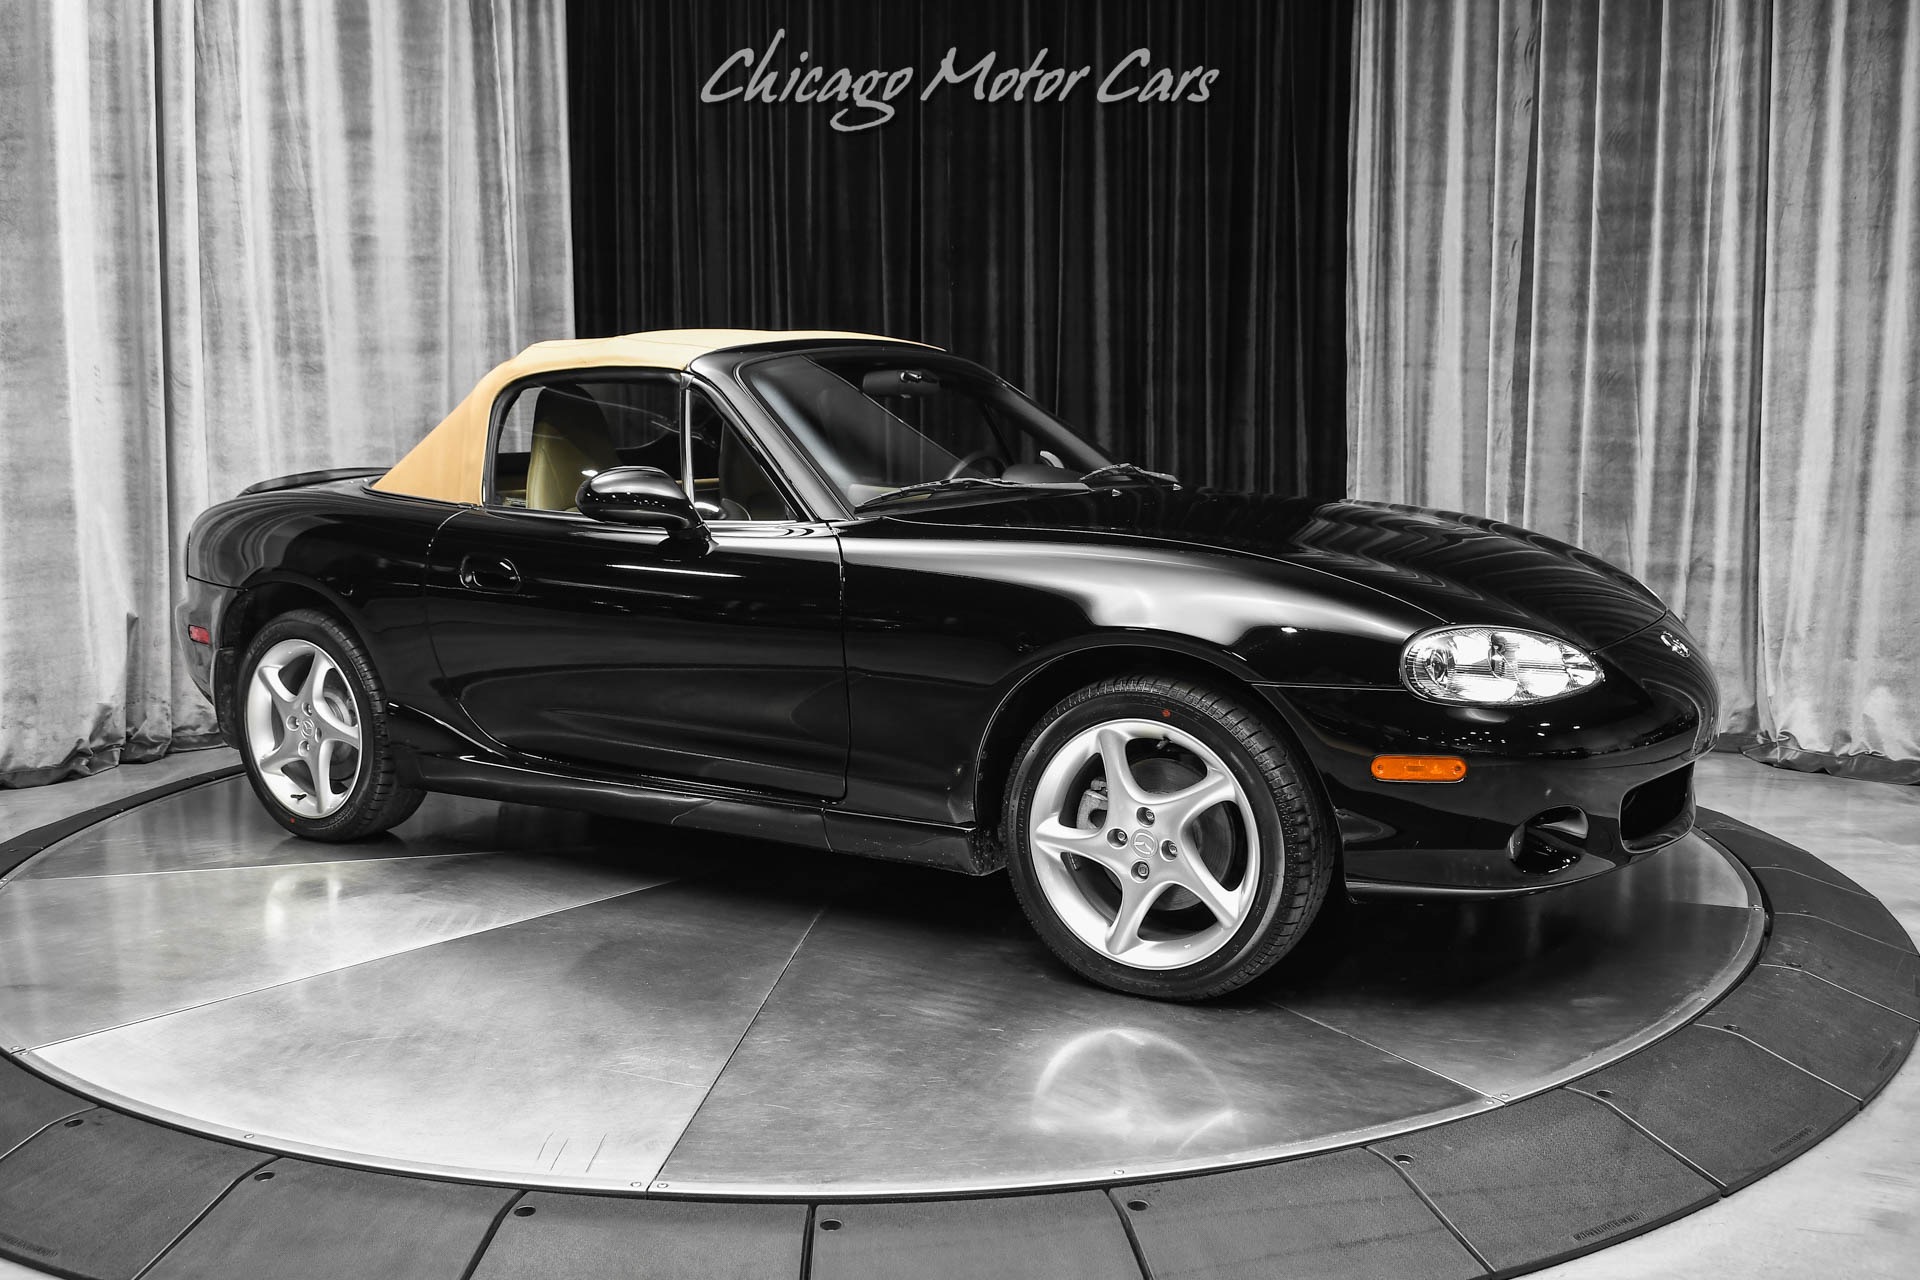 Used-2002-Mazda-MX-5-Miata-LS-One-Owner-ONLY-5k-Miles-5-Speed-Manual-STUNNING-Example